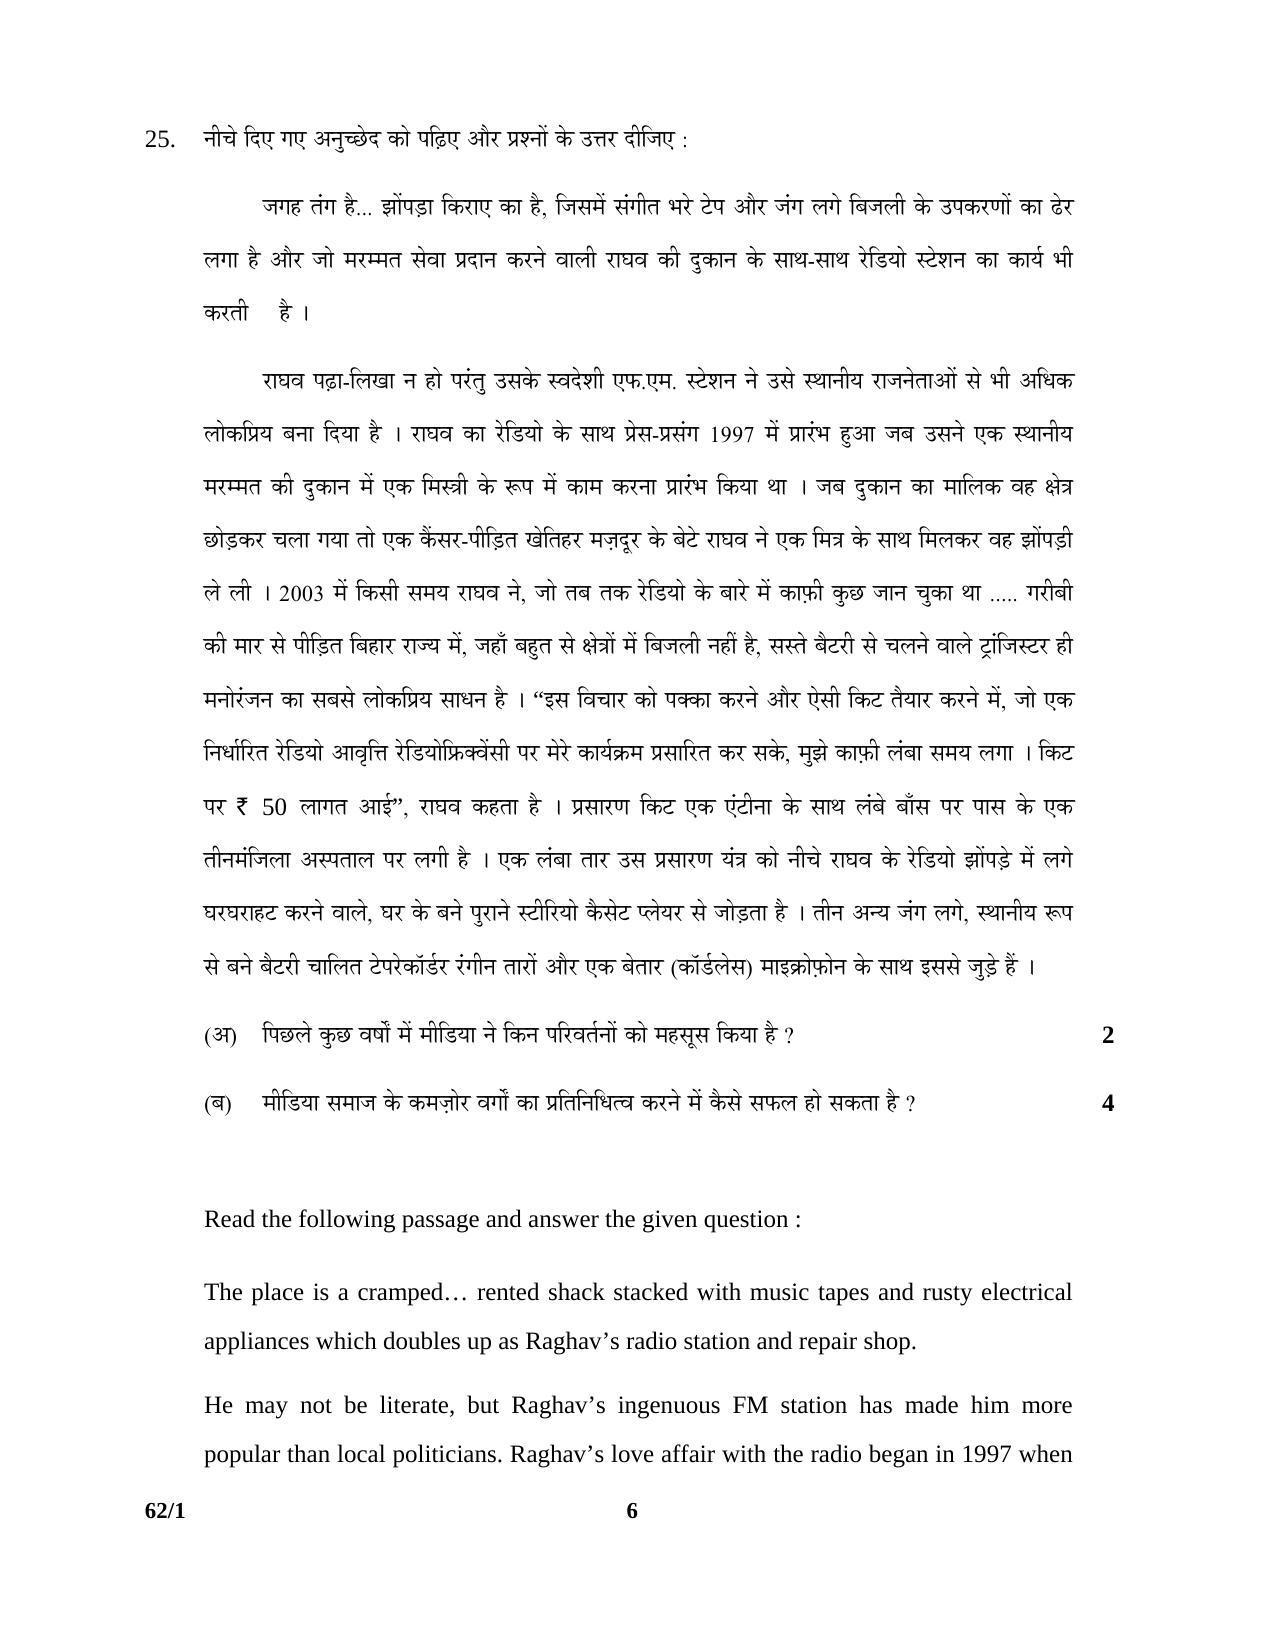 CBSE Class 12 62-1 SOCIOLOGY 2016 Question Paper - Page 6